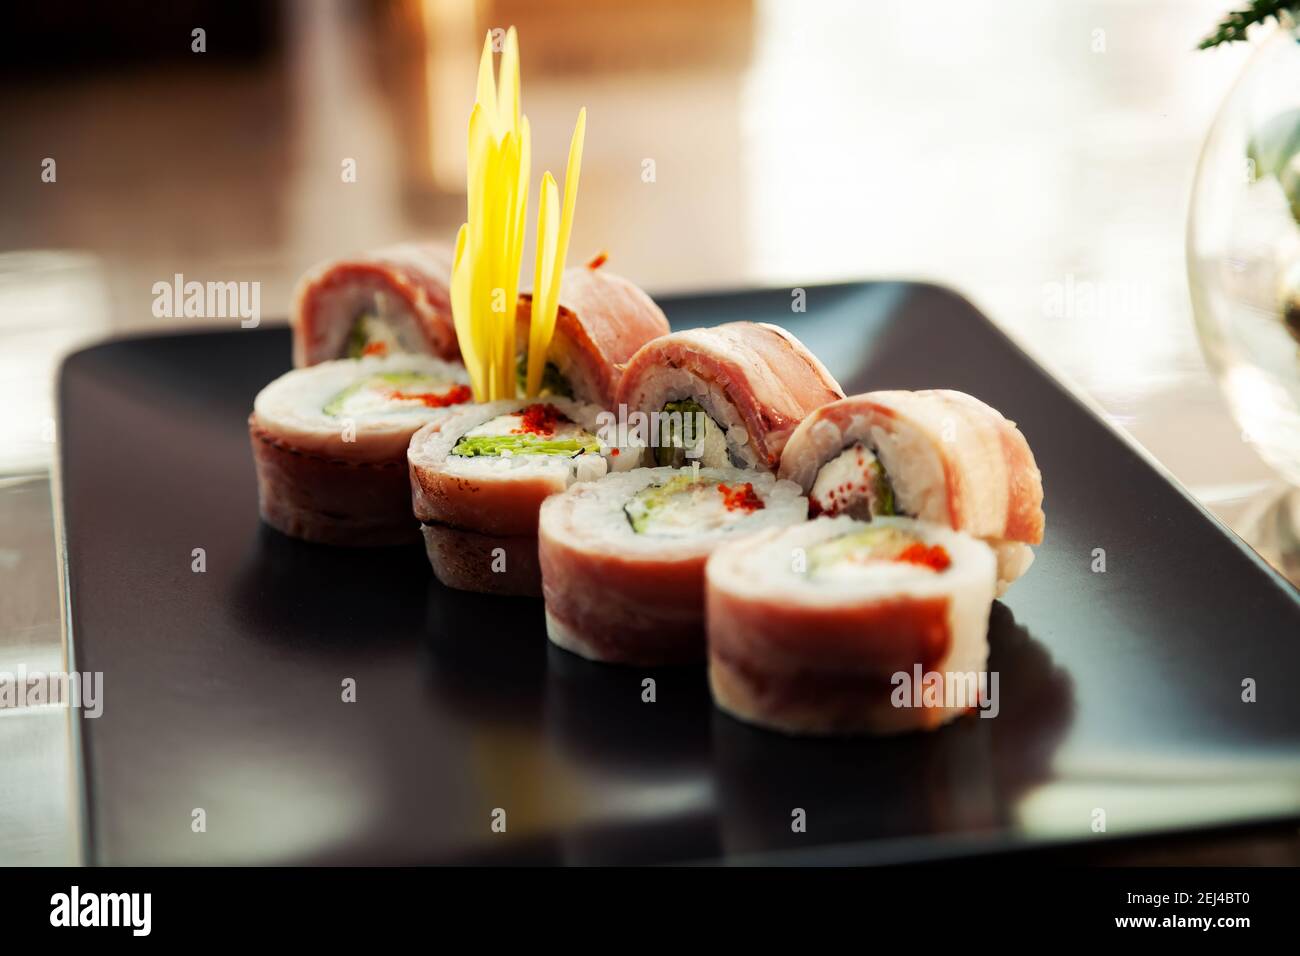 Sushi roll with bacon and fried sea bass on a black plate, ingredients fried sea bass, cream cheese, bacon, Iceberg salad, flying fish roe, Teriyaki sauce, rice, nori. For the restaurant menu Stock Photo